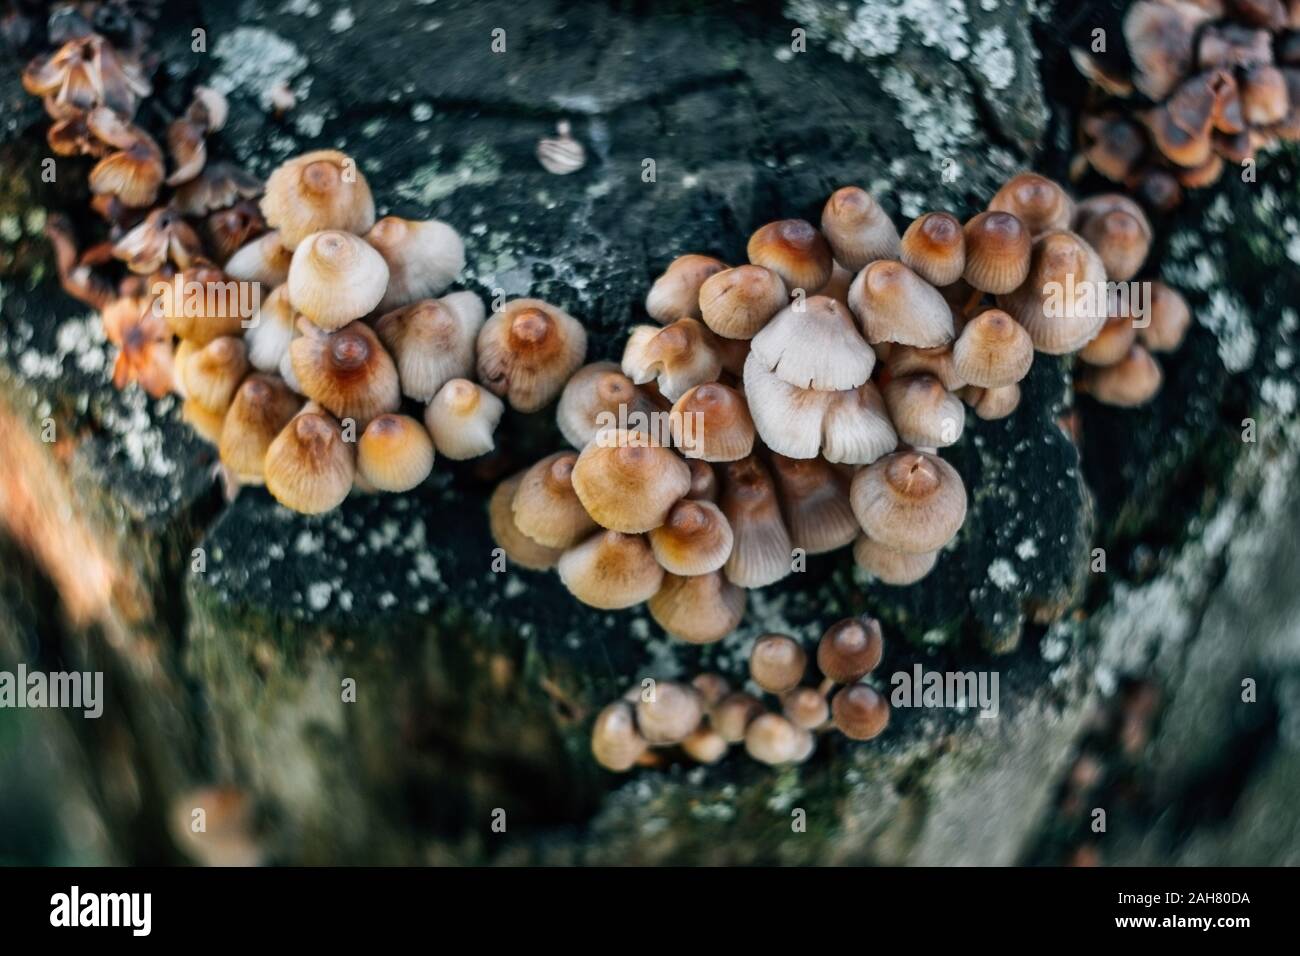 Mycena inclinata mushroom cluster on old rotten stump close-up. A group of brown small mushrooms on a tree on a green background, macro. Stock Photo